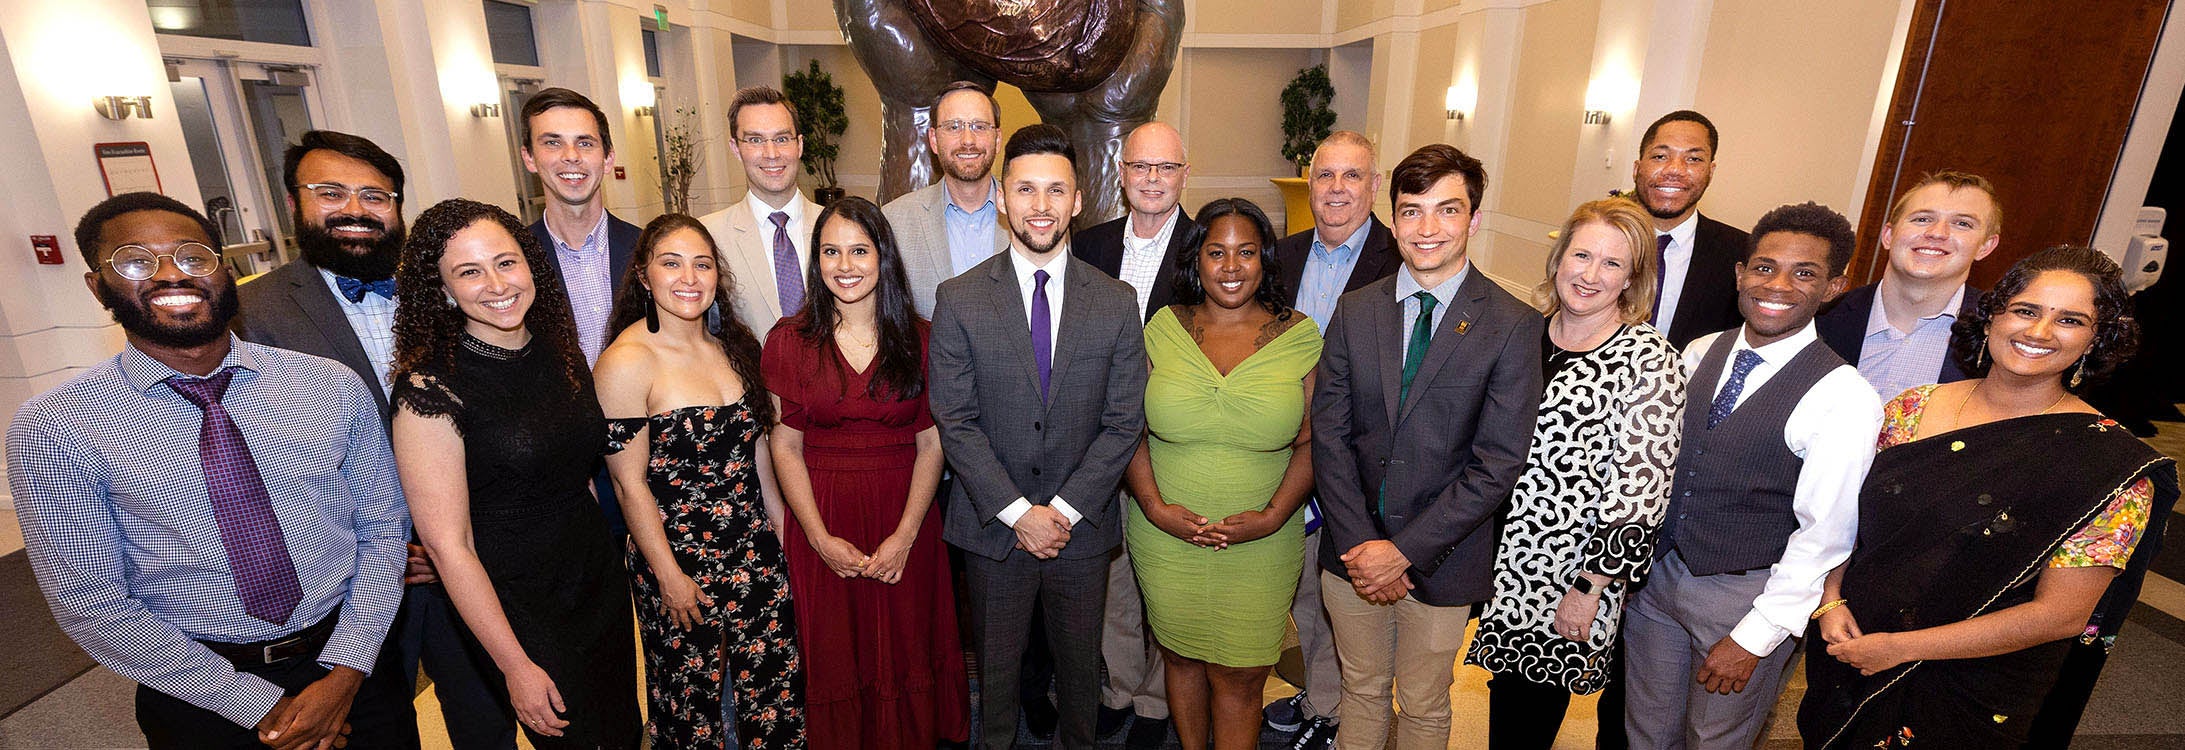 Current and past Brody Scholars gathered to celebrate the 40th anniversary of the Brody Scholars program.